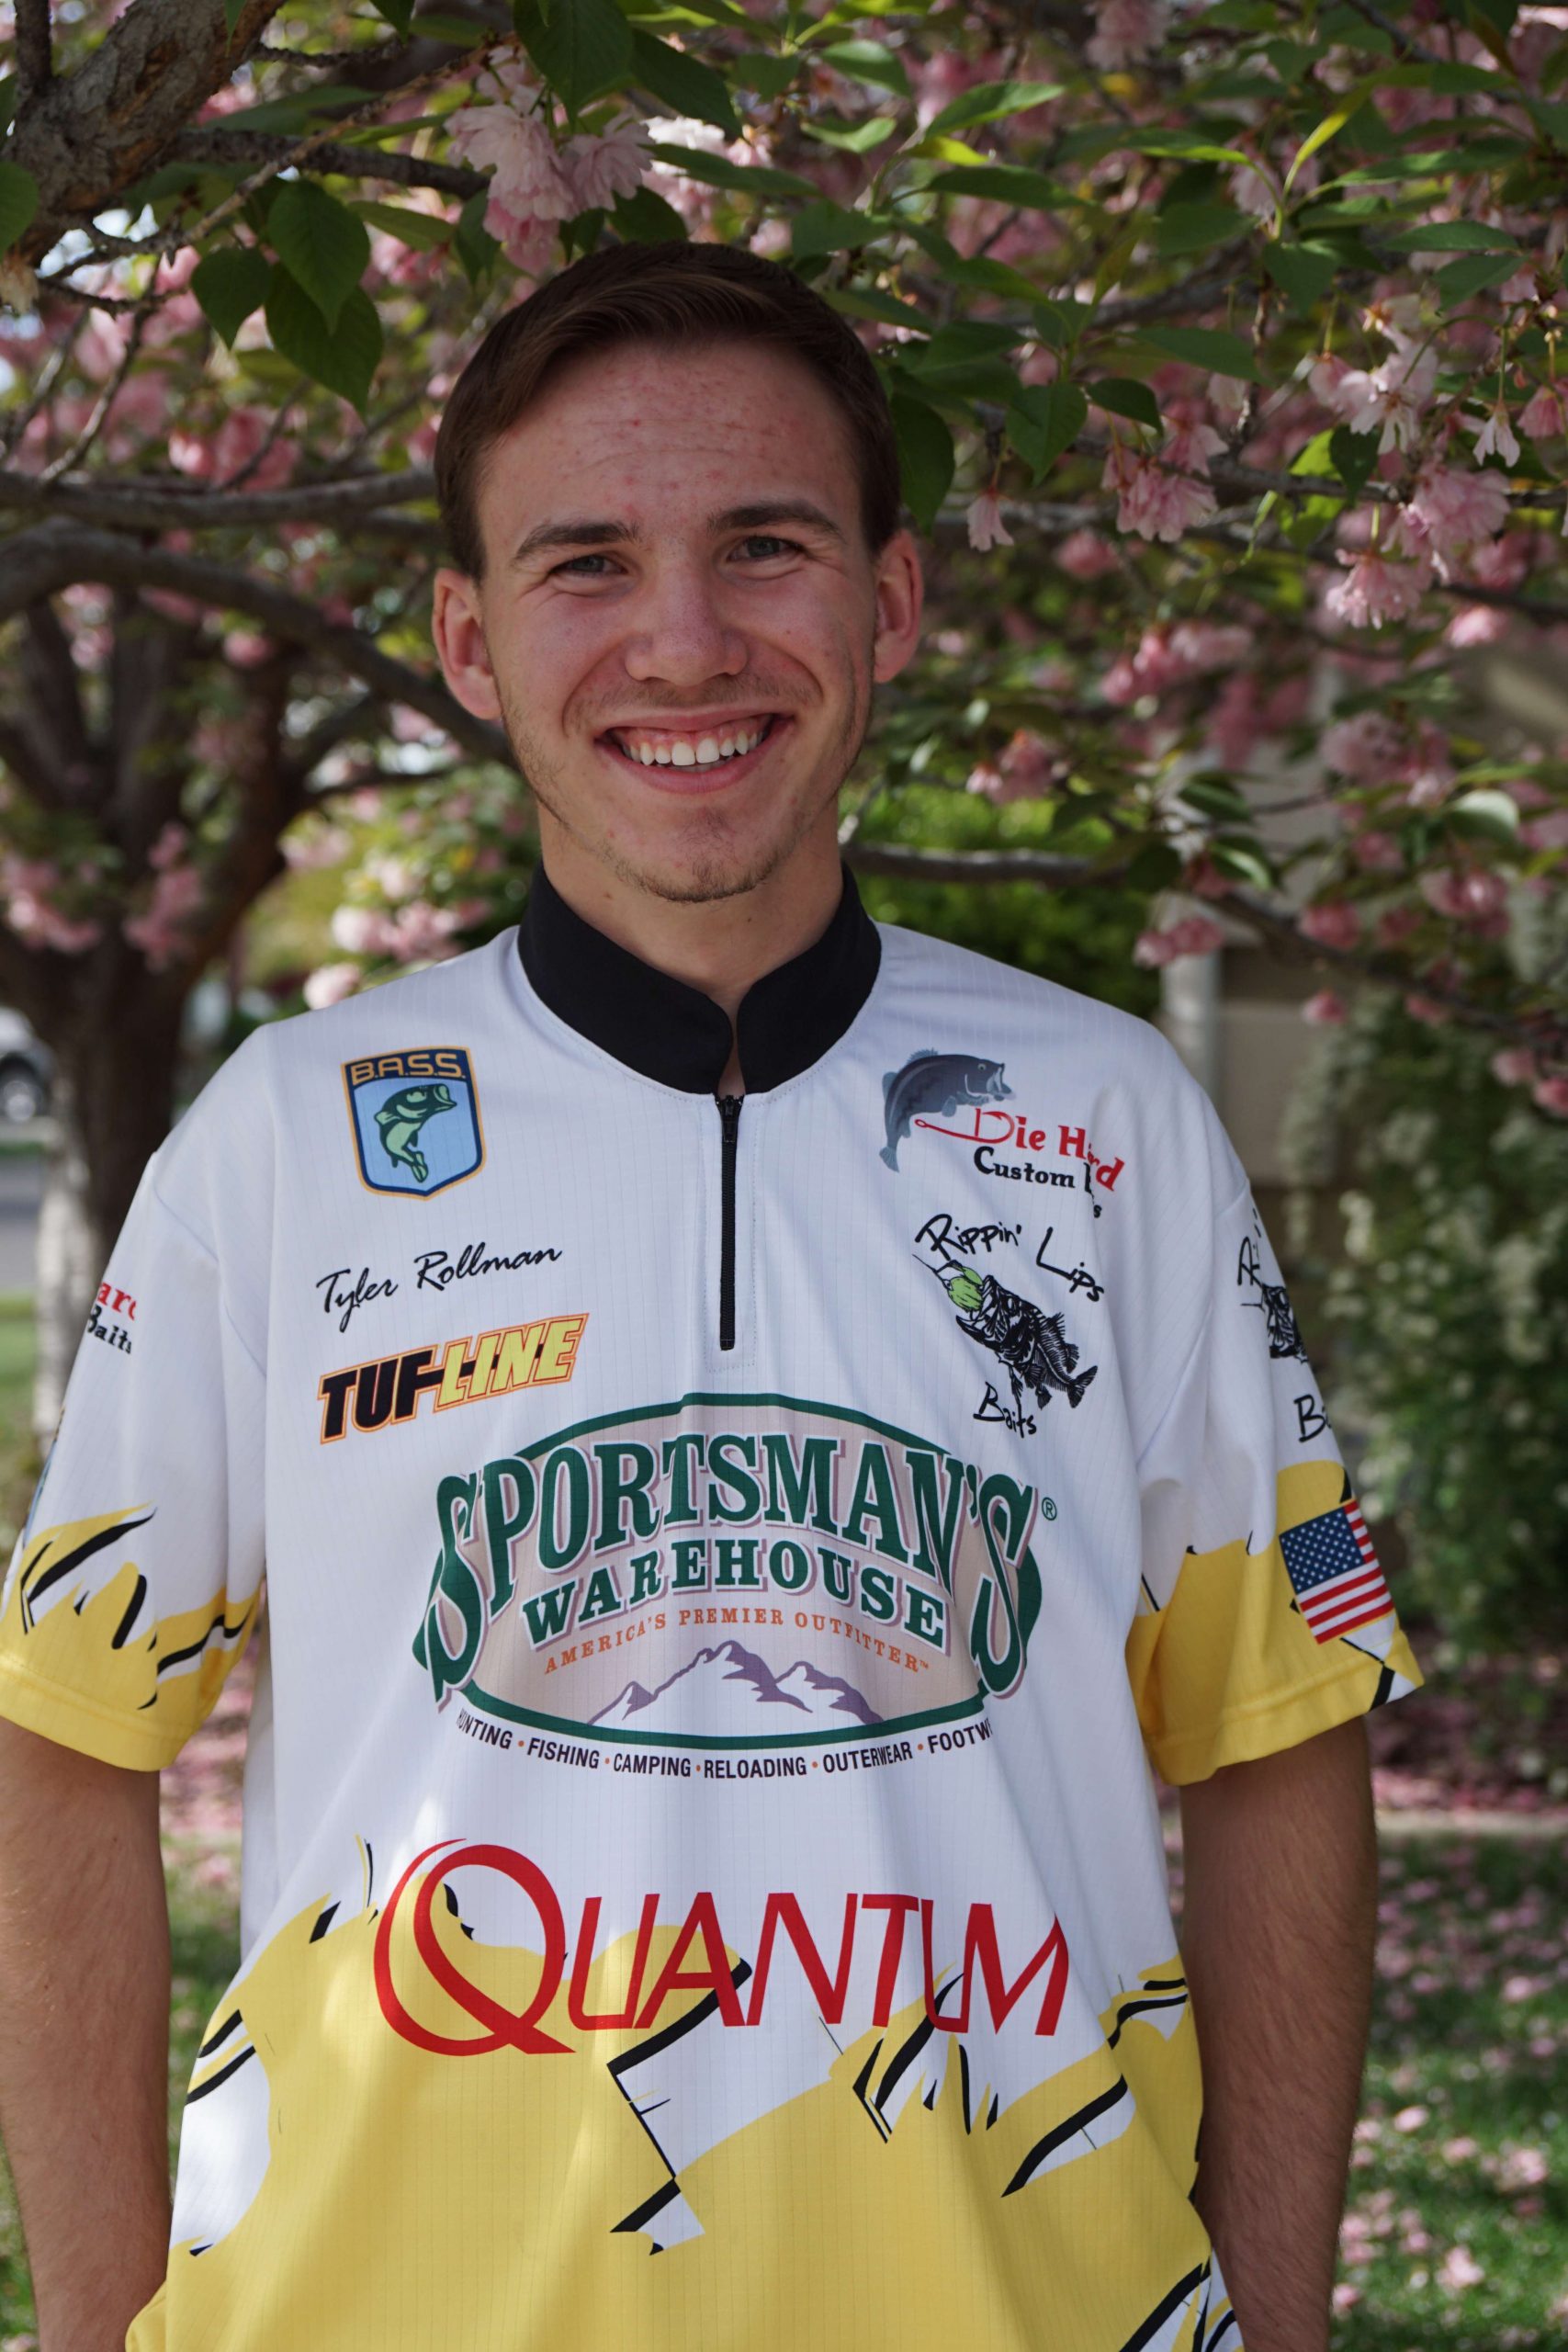 <p>Utah: Tyler Rollman</p>
<p>
Rollman is an 11th-grader at Judge Memorial Catholic High School. Last summer, he won a club tournament on Pineview Reservoir and the TBF Utah Youth Qualifier on Deer Creek. In all, he's competed in 36 Utah state junior tournaments, winning 11 times. Rollman started the fishing club at his school and serves as its president.